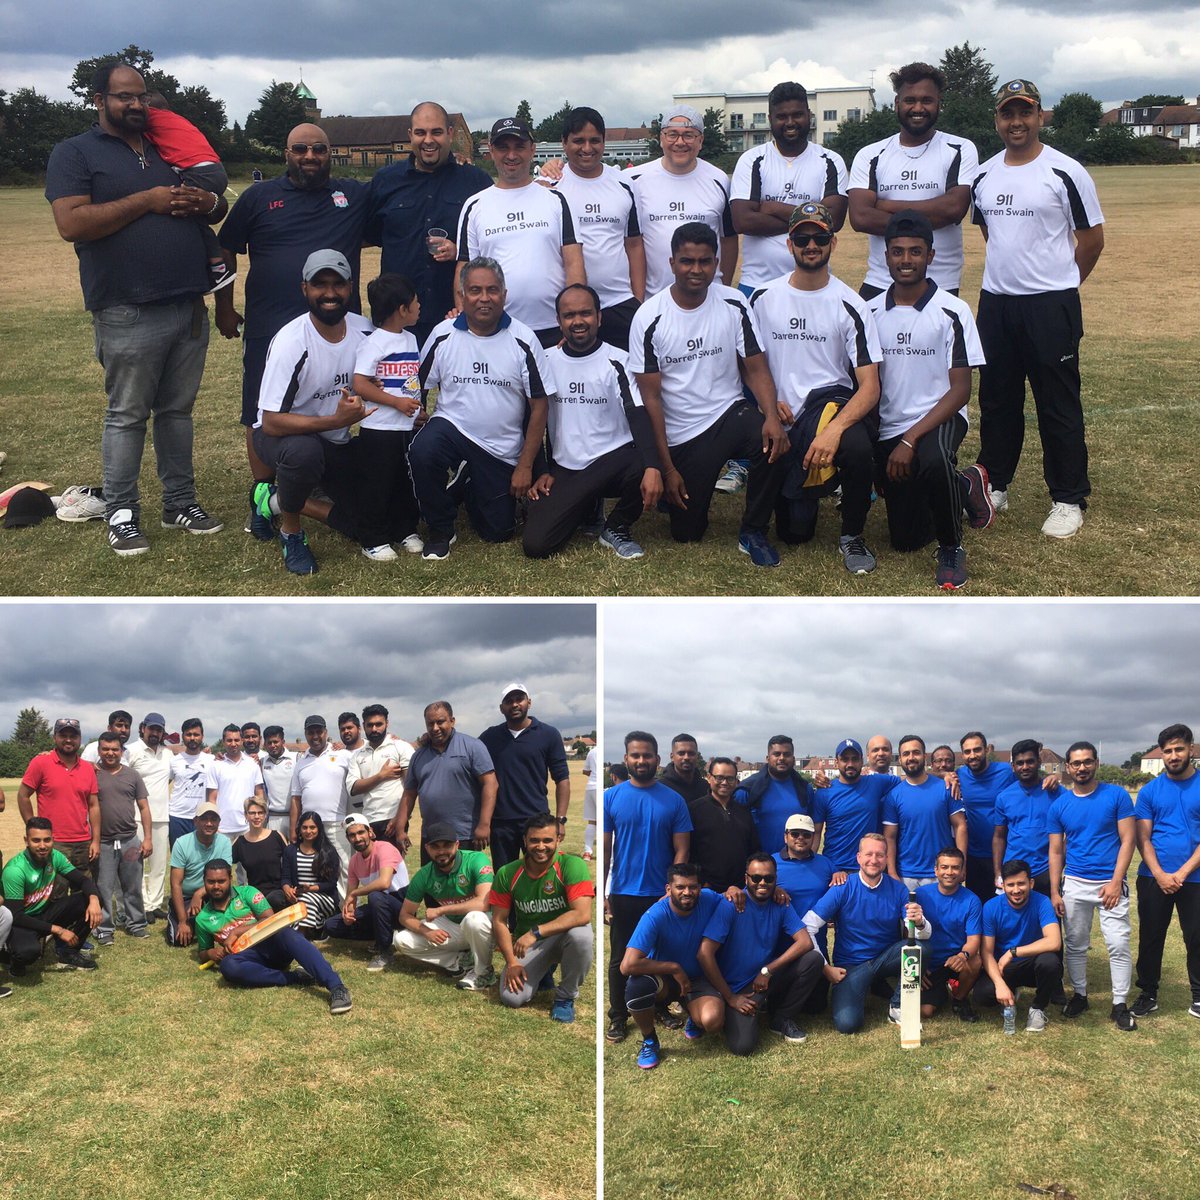 What a Weekend of Sport!! Charity Cricket & Football Funday on London Convenience was the cherry on the cake!! 🍰  @CRUK_Policy @TheBHF @DiabetesUK #CricketWorldCupFinal 😉 @martintsmith @nessrogers99 @kevintindall #teamgoals #fundraising  🏏⚽️🏏⚽️ @Tesco_London